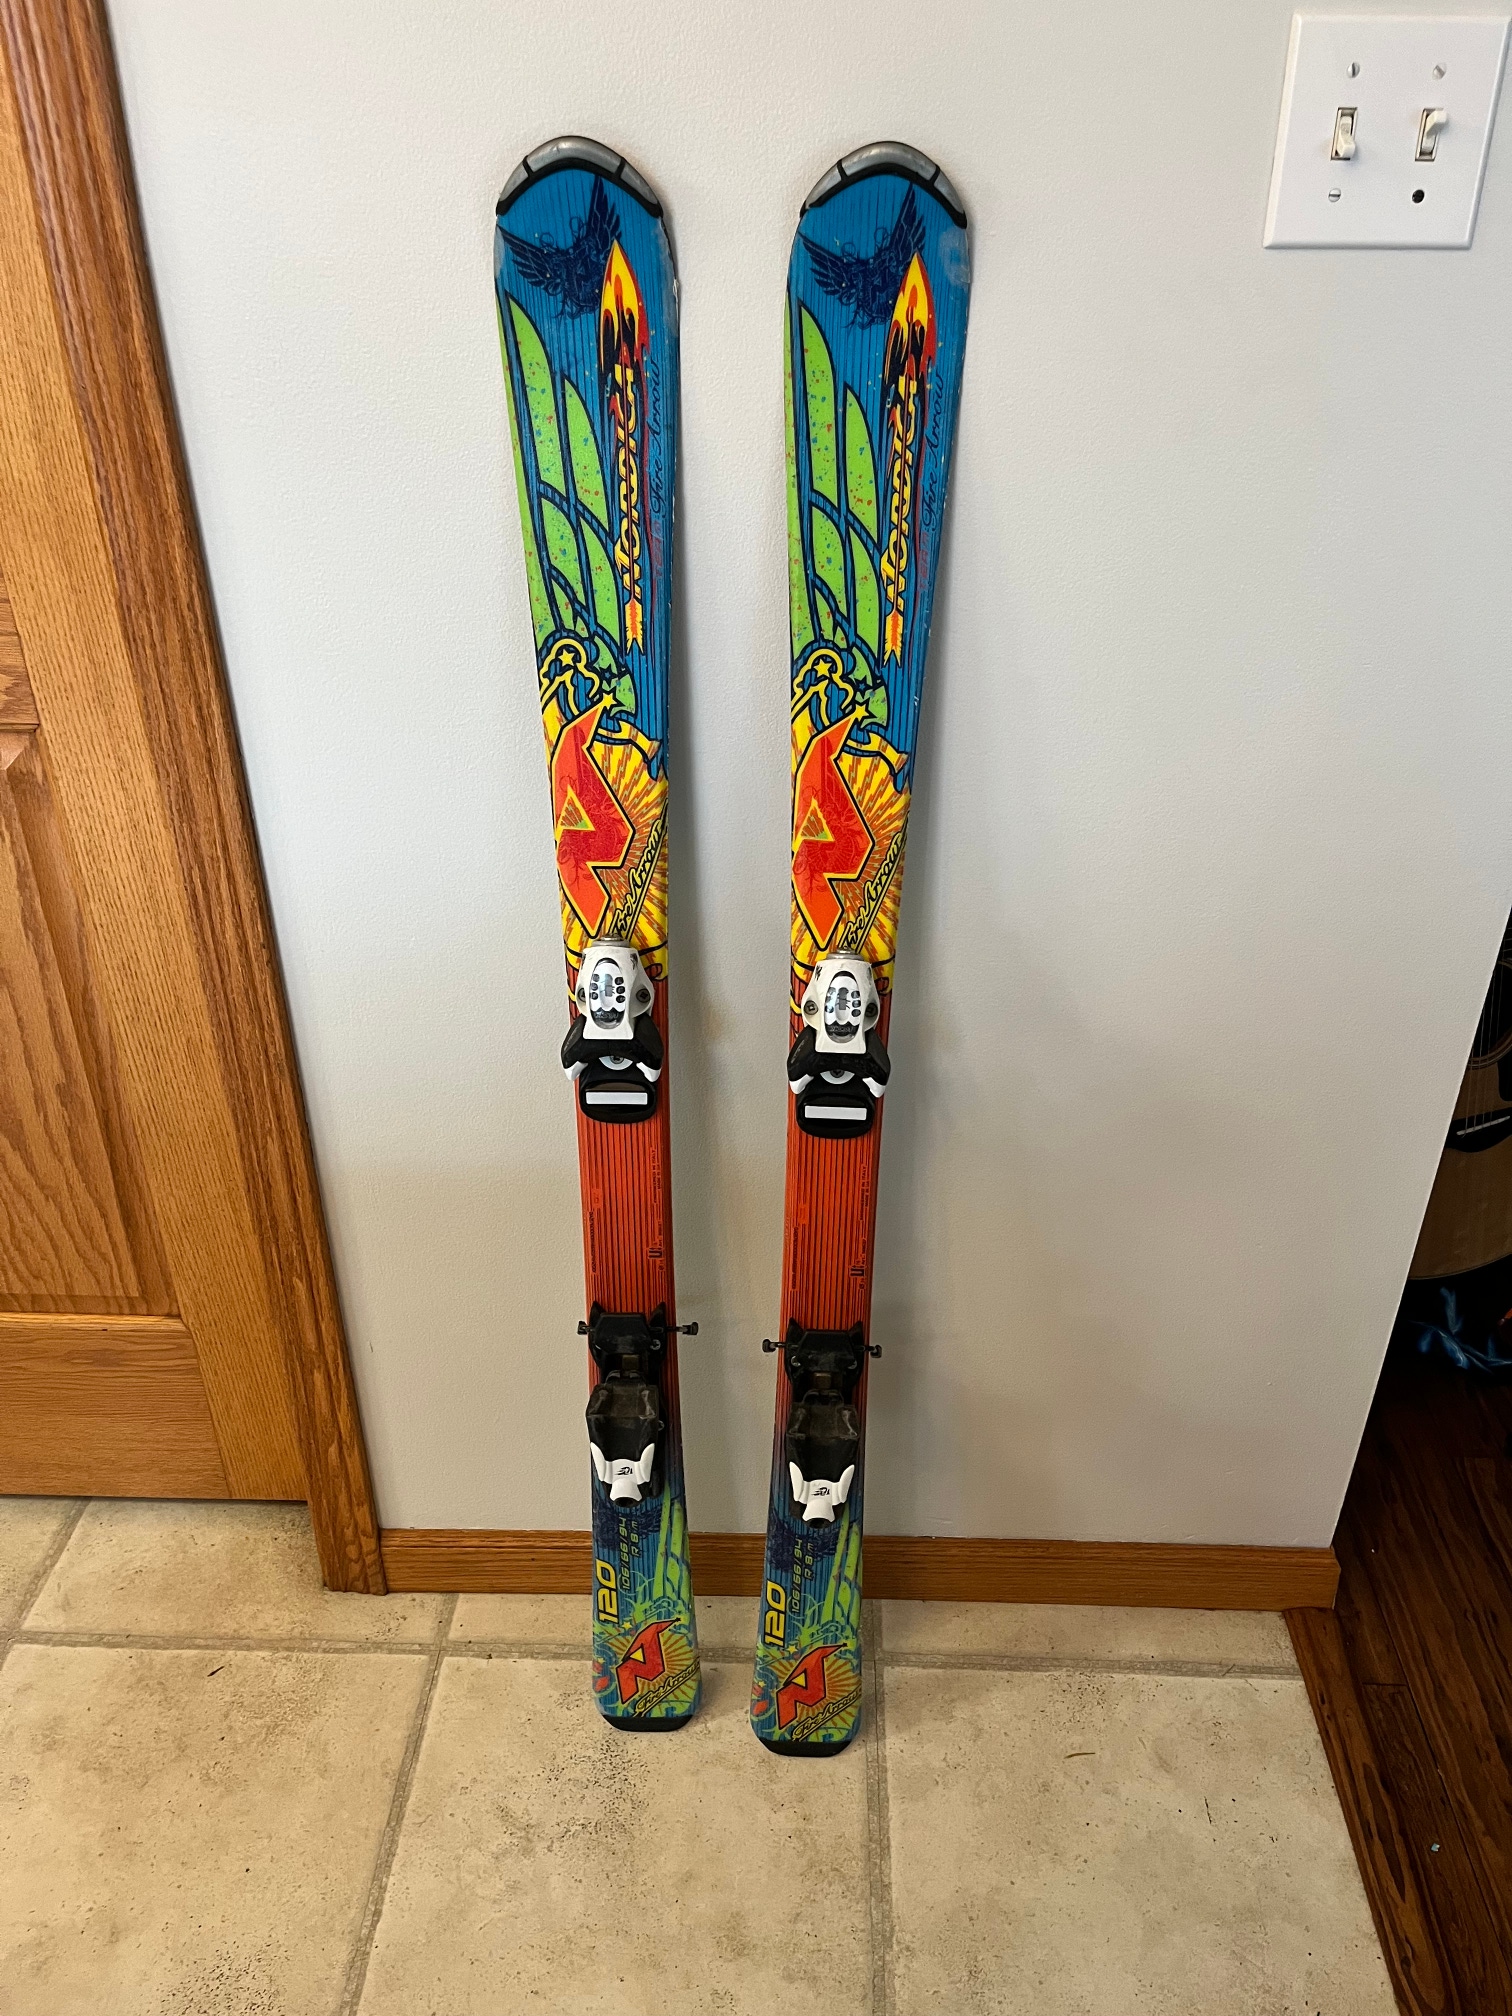 Used Unisex 2012 Nordica 120 cm All Mountain FireArrow Team Skis With Bindings